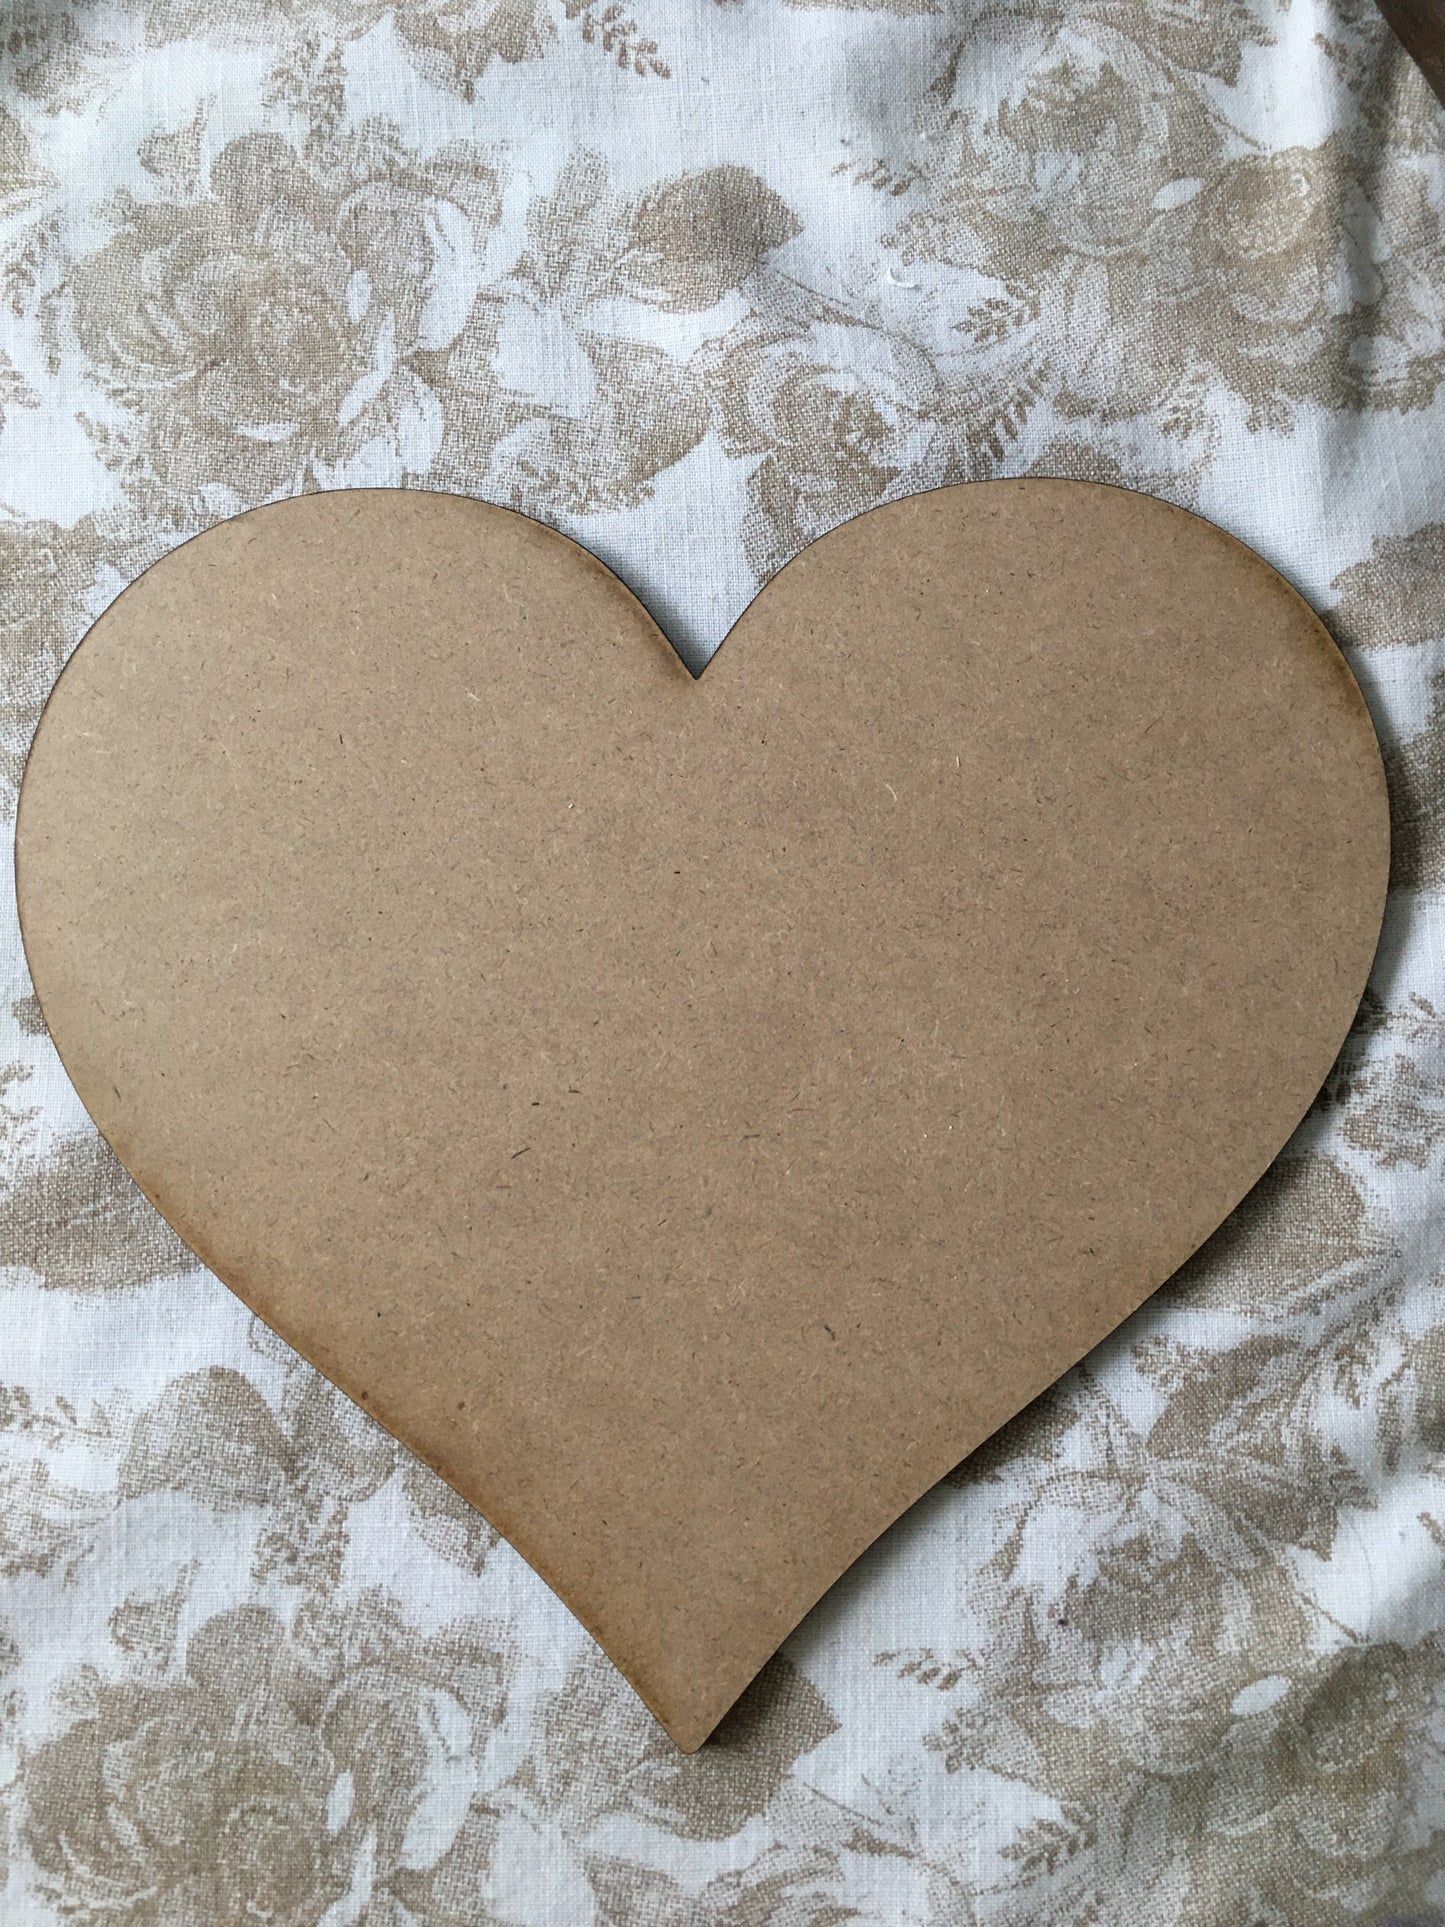 Heart cut out - unfinished DIY